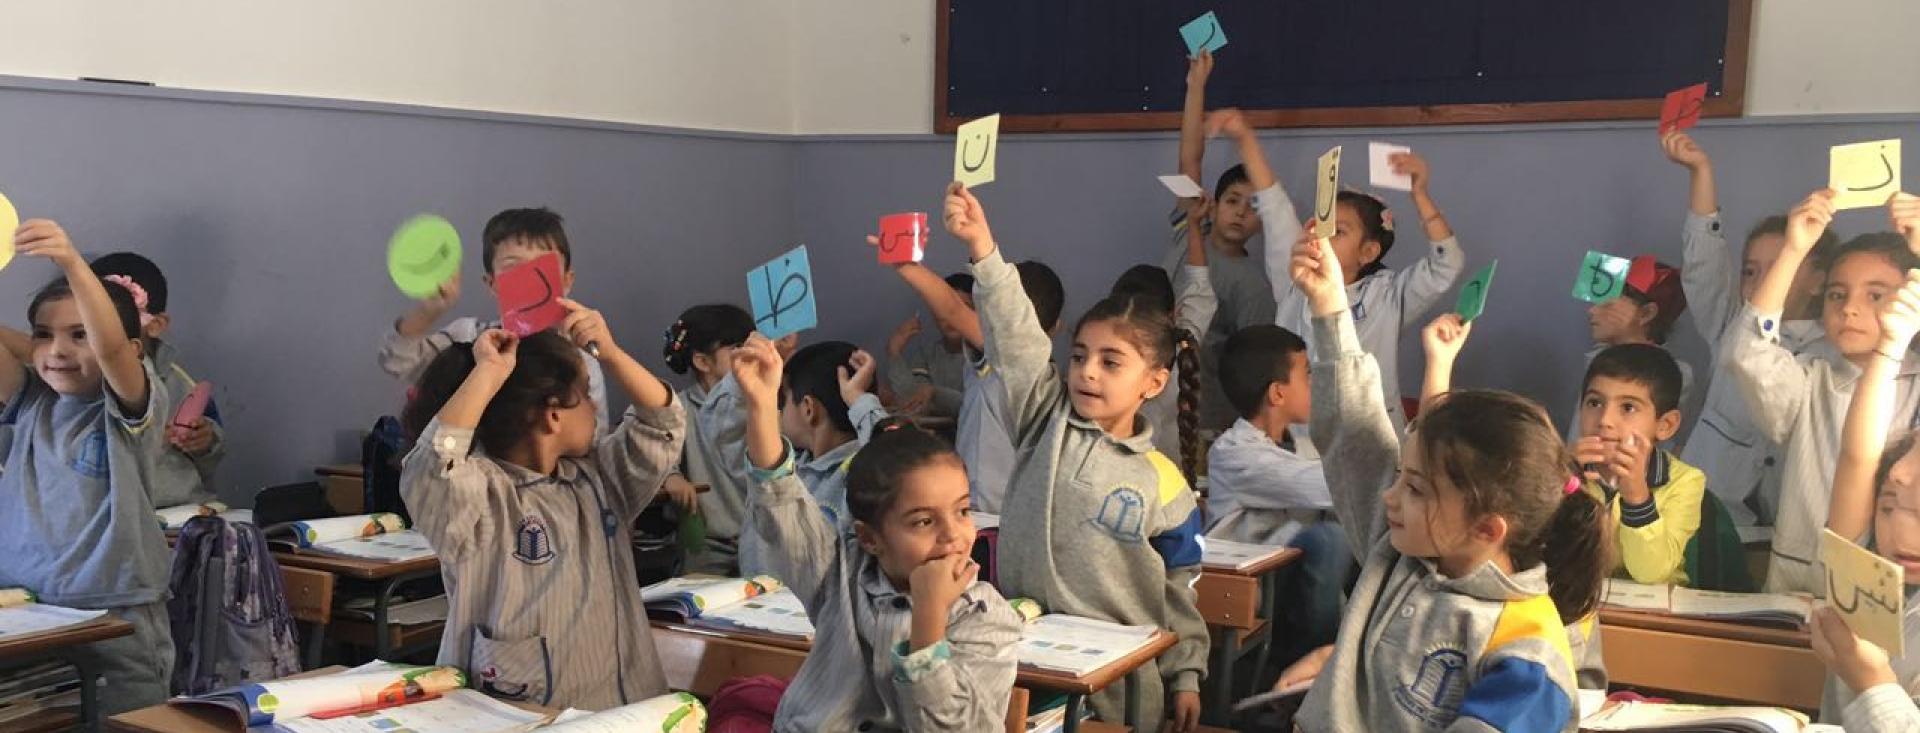 Young children in school uniforms fill a classroom, seated in rows. Books are open on their desks. The students are holding up colorful cards, each with a letter of the Arabic alphabet. Some are sitting, while the rest are standing with raised hands